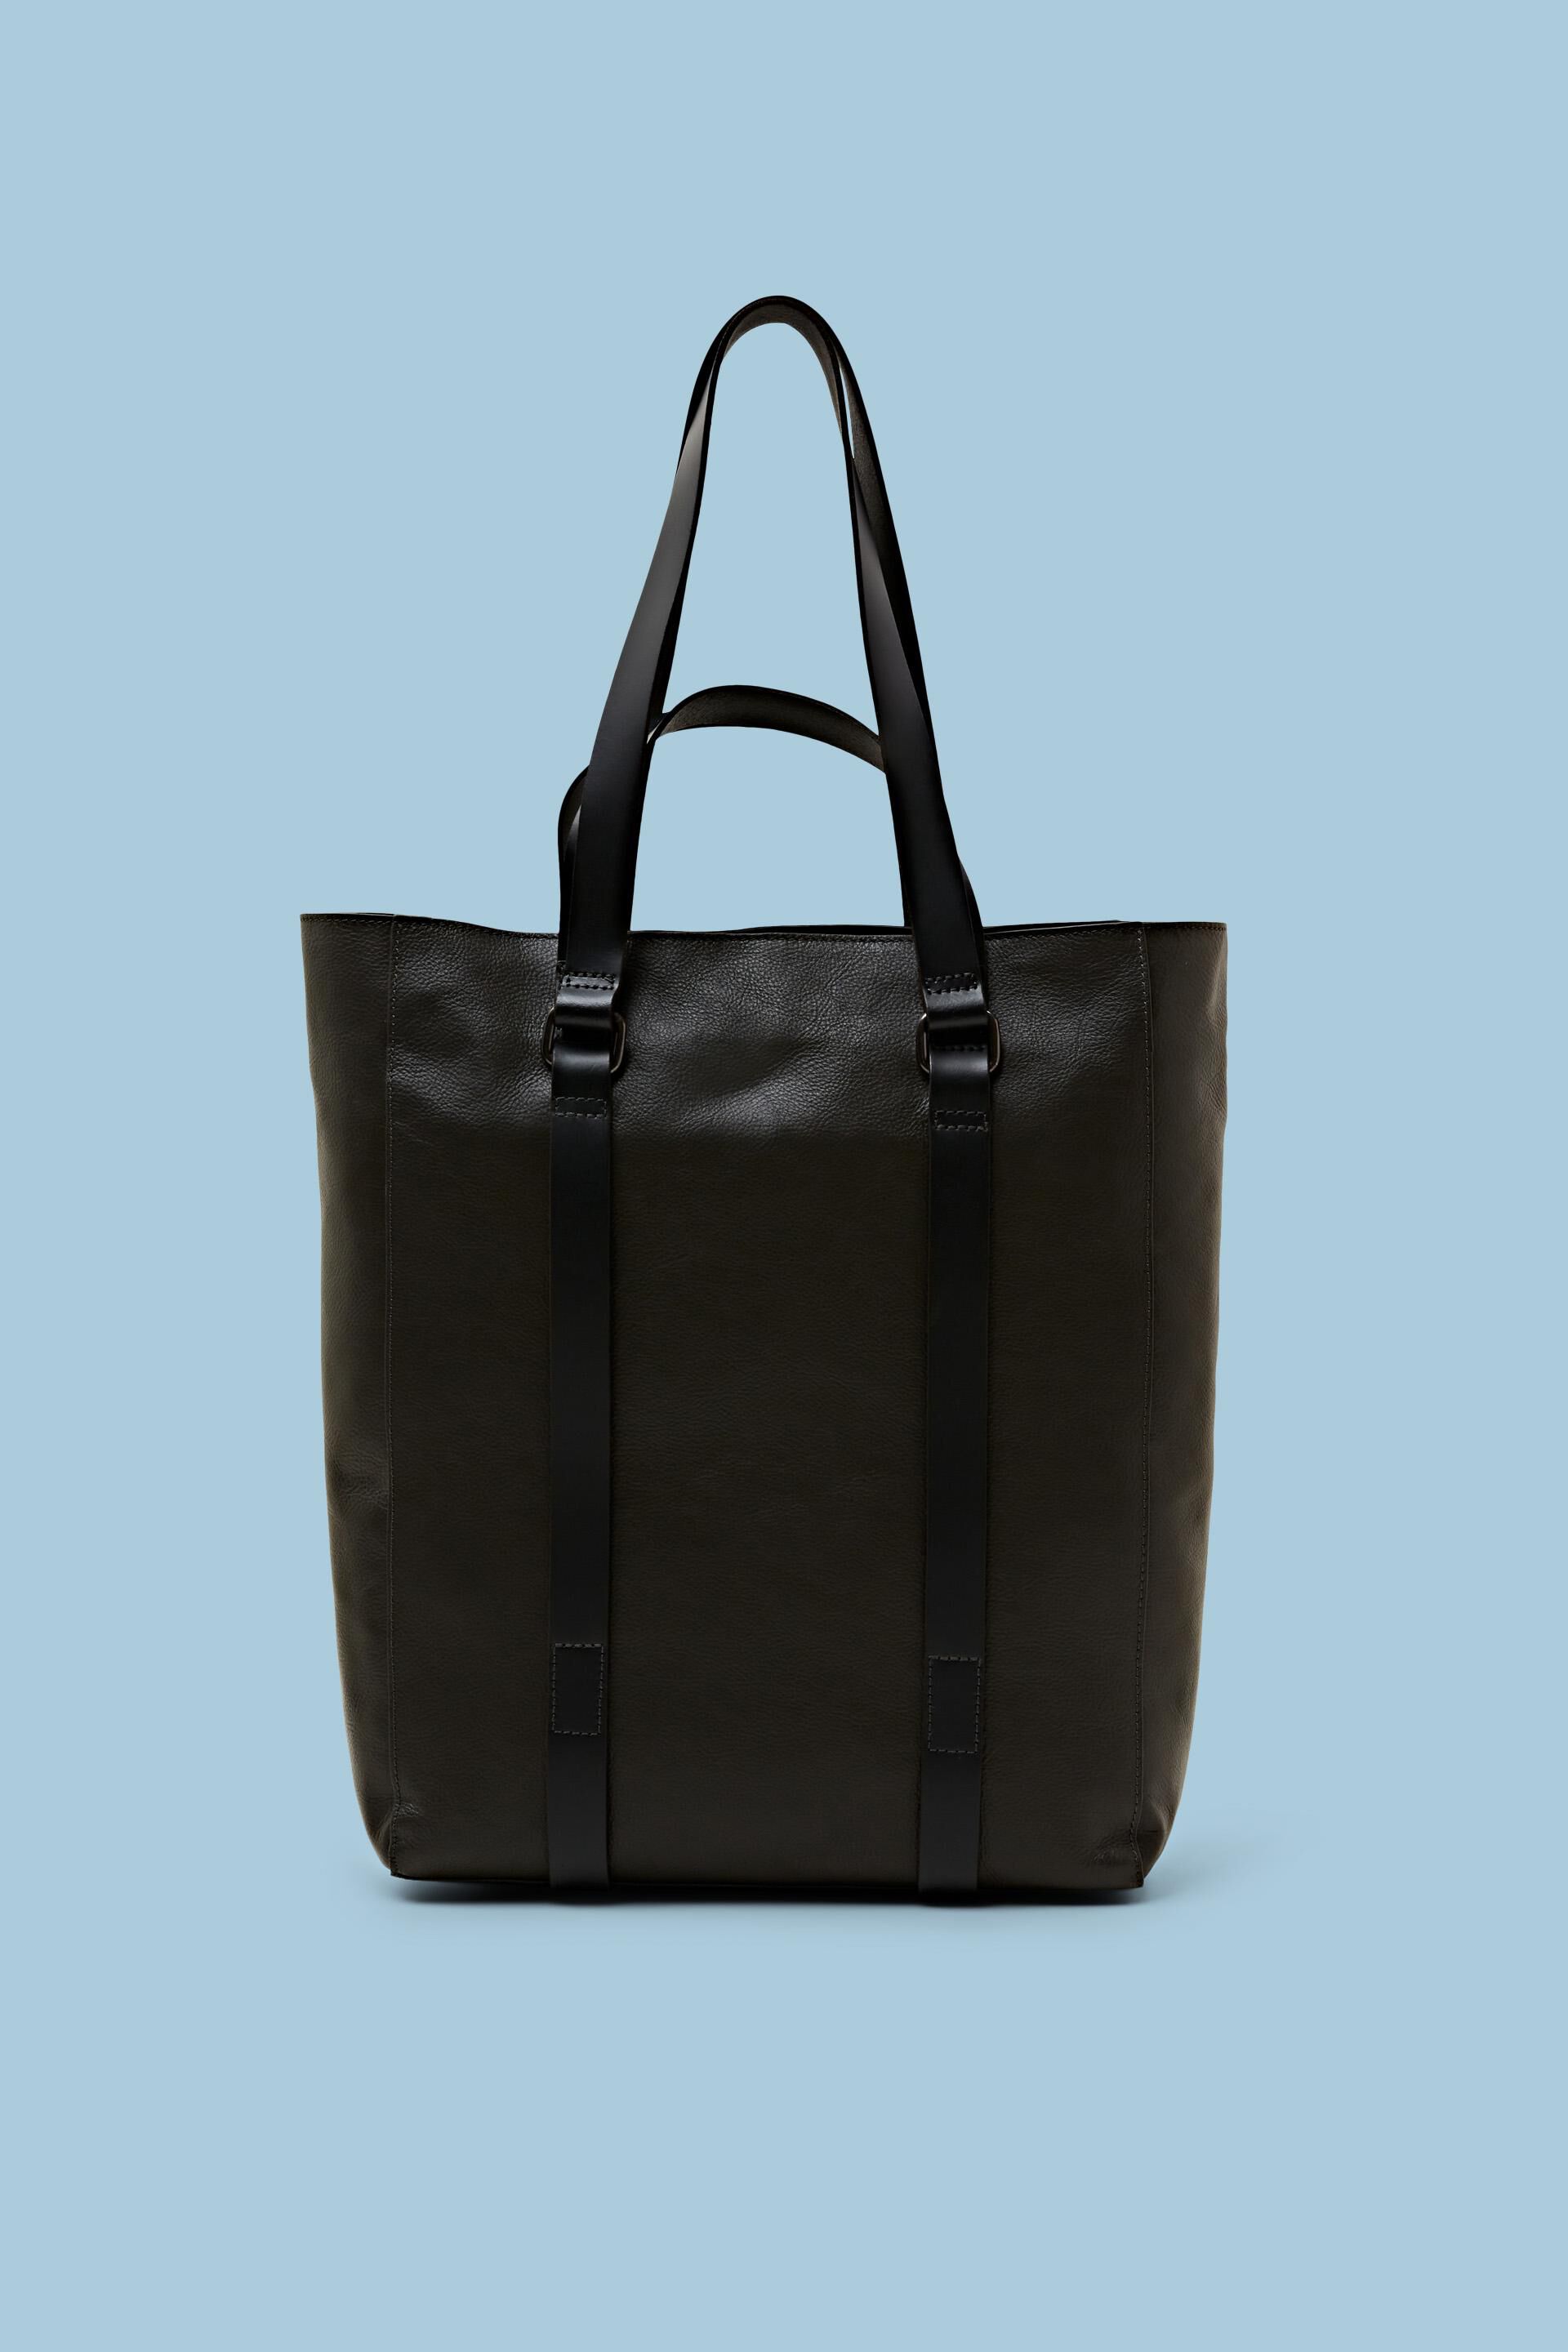 ESPRIT - Leather Tote Bag at our online shop